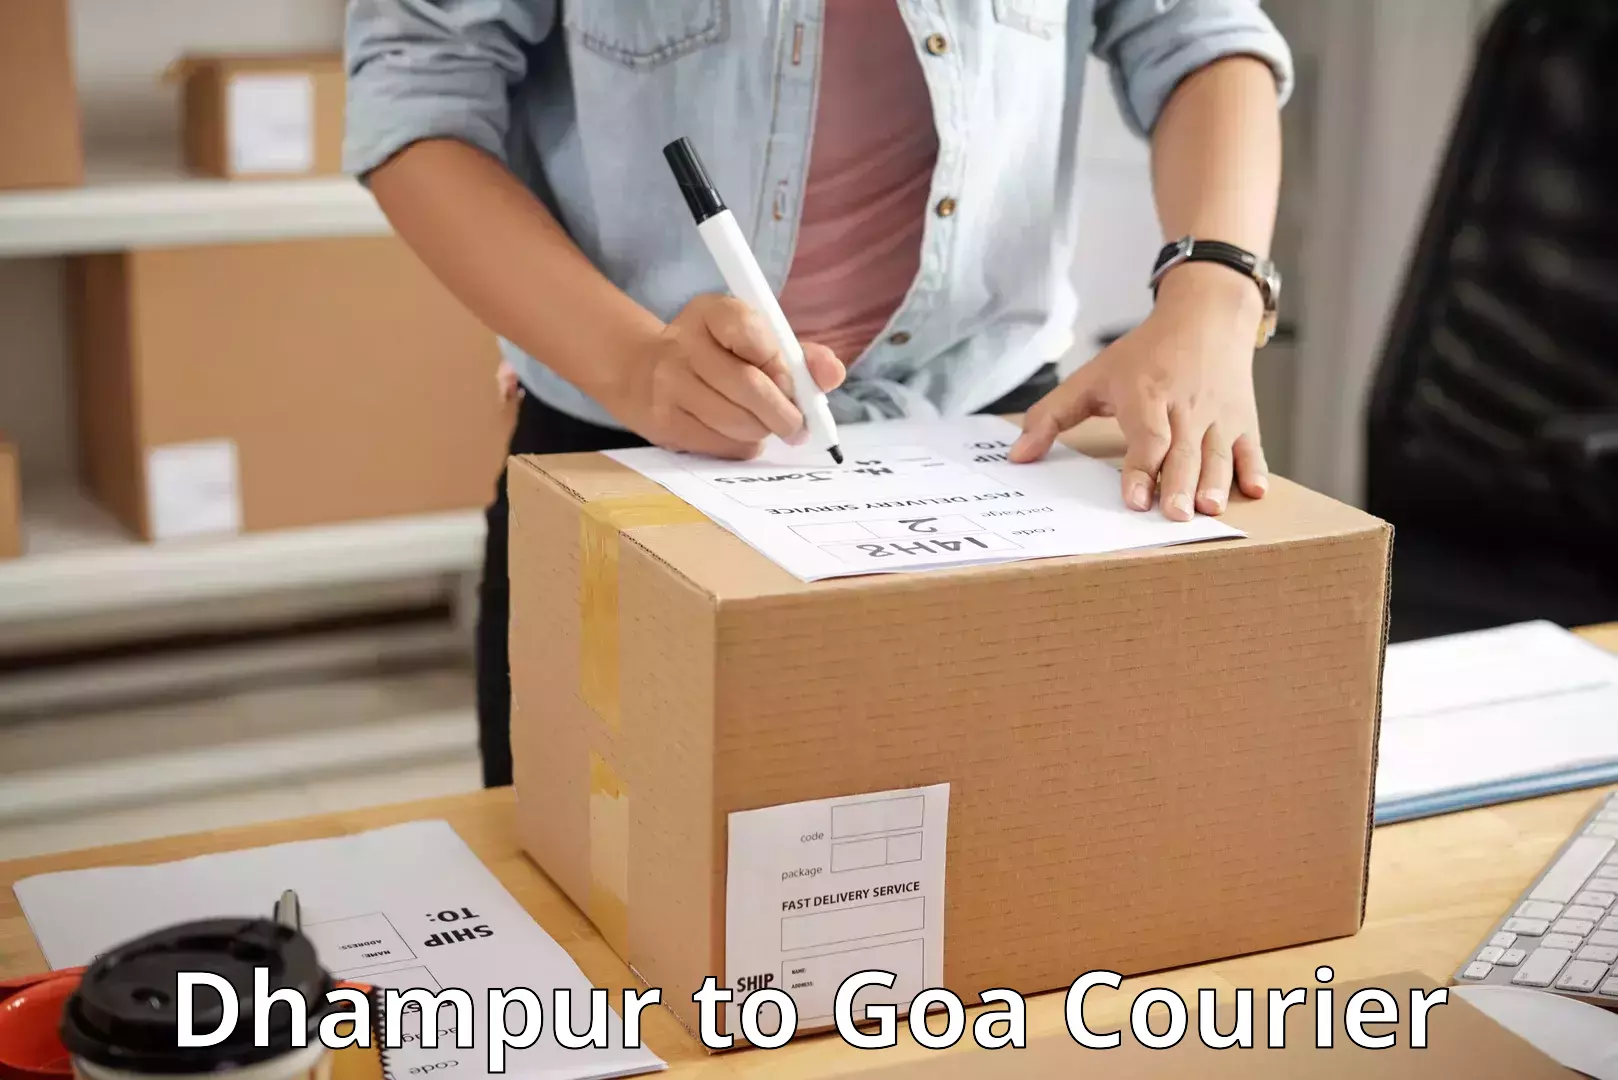 Express logistics providers Dhampur to Goa